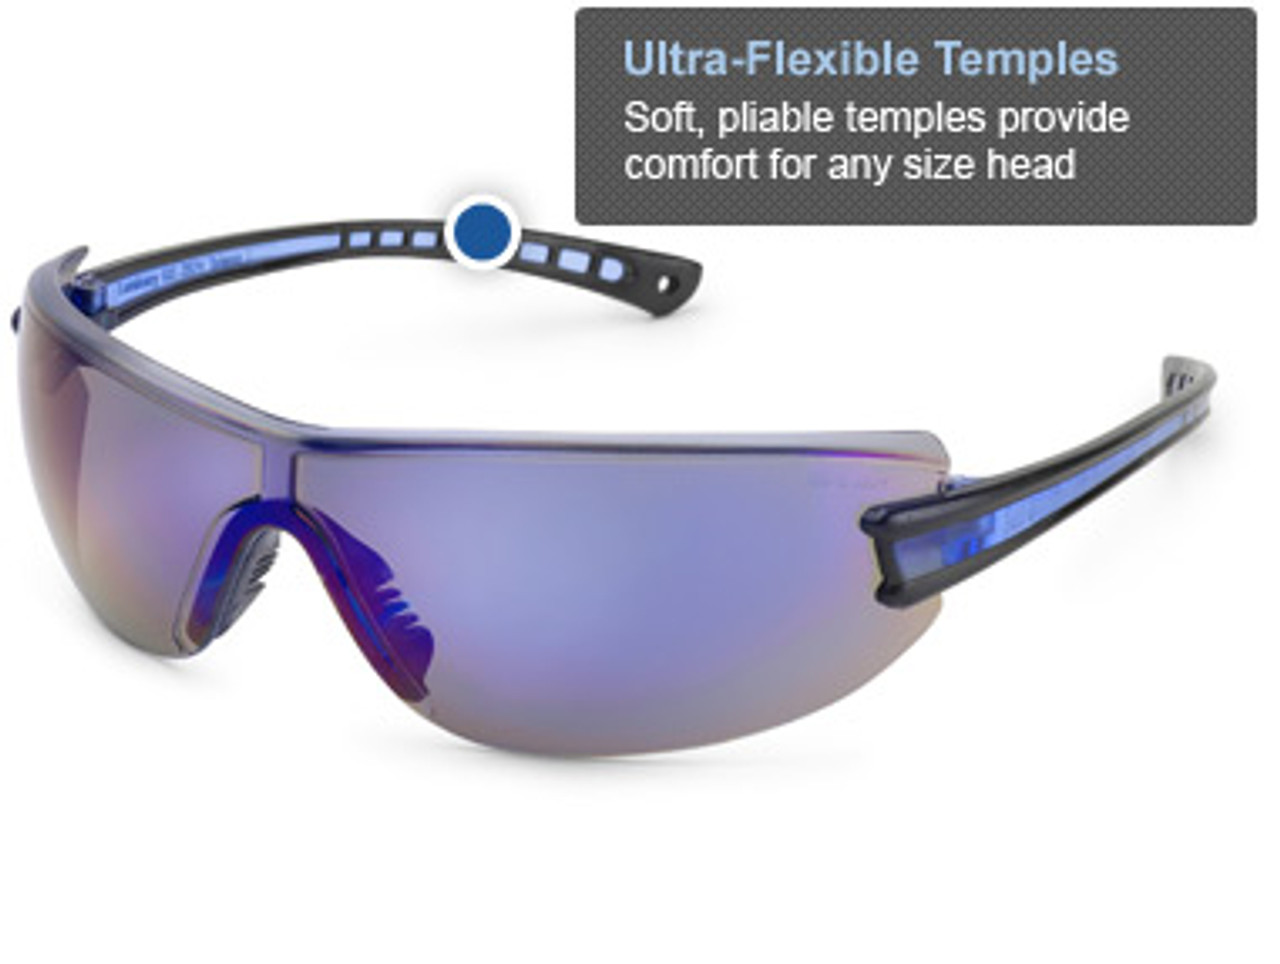 Luminary has the look, fit and feel that make it one of the lightest and brightest solutions in safety eyewear.